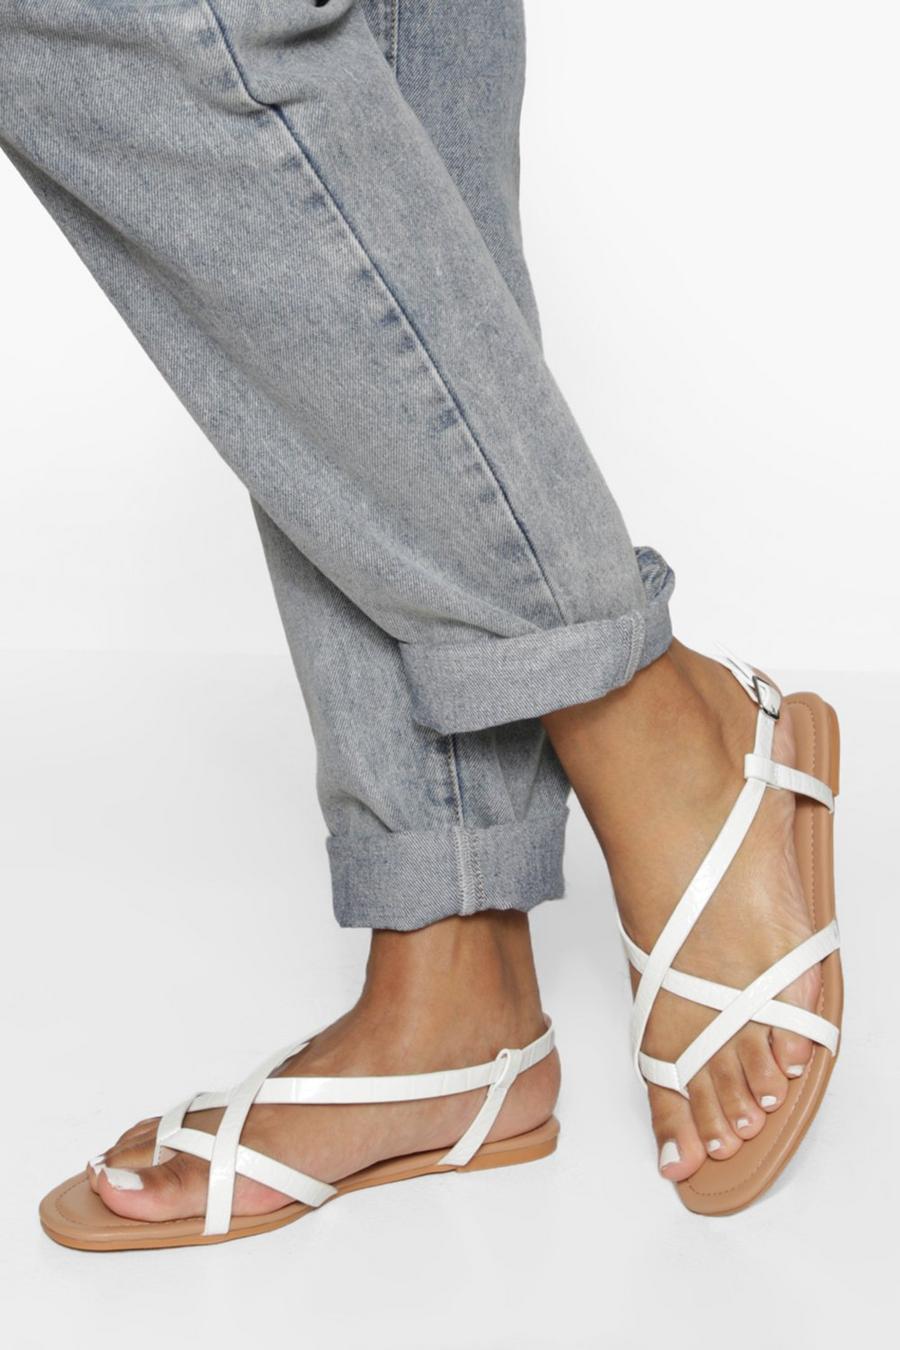 White Wide Width Croc Toe Post Basic Strappy Sandal image number 1